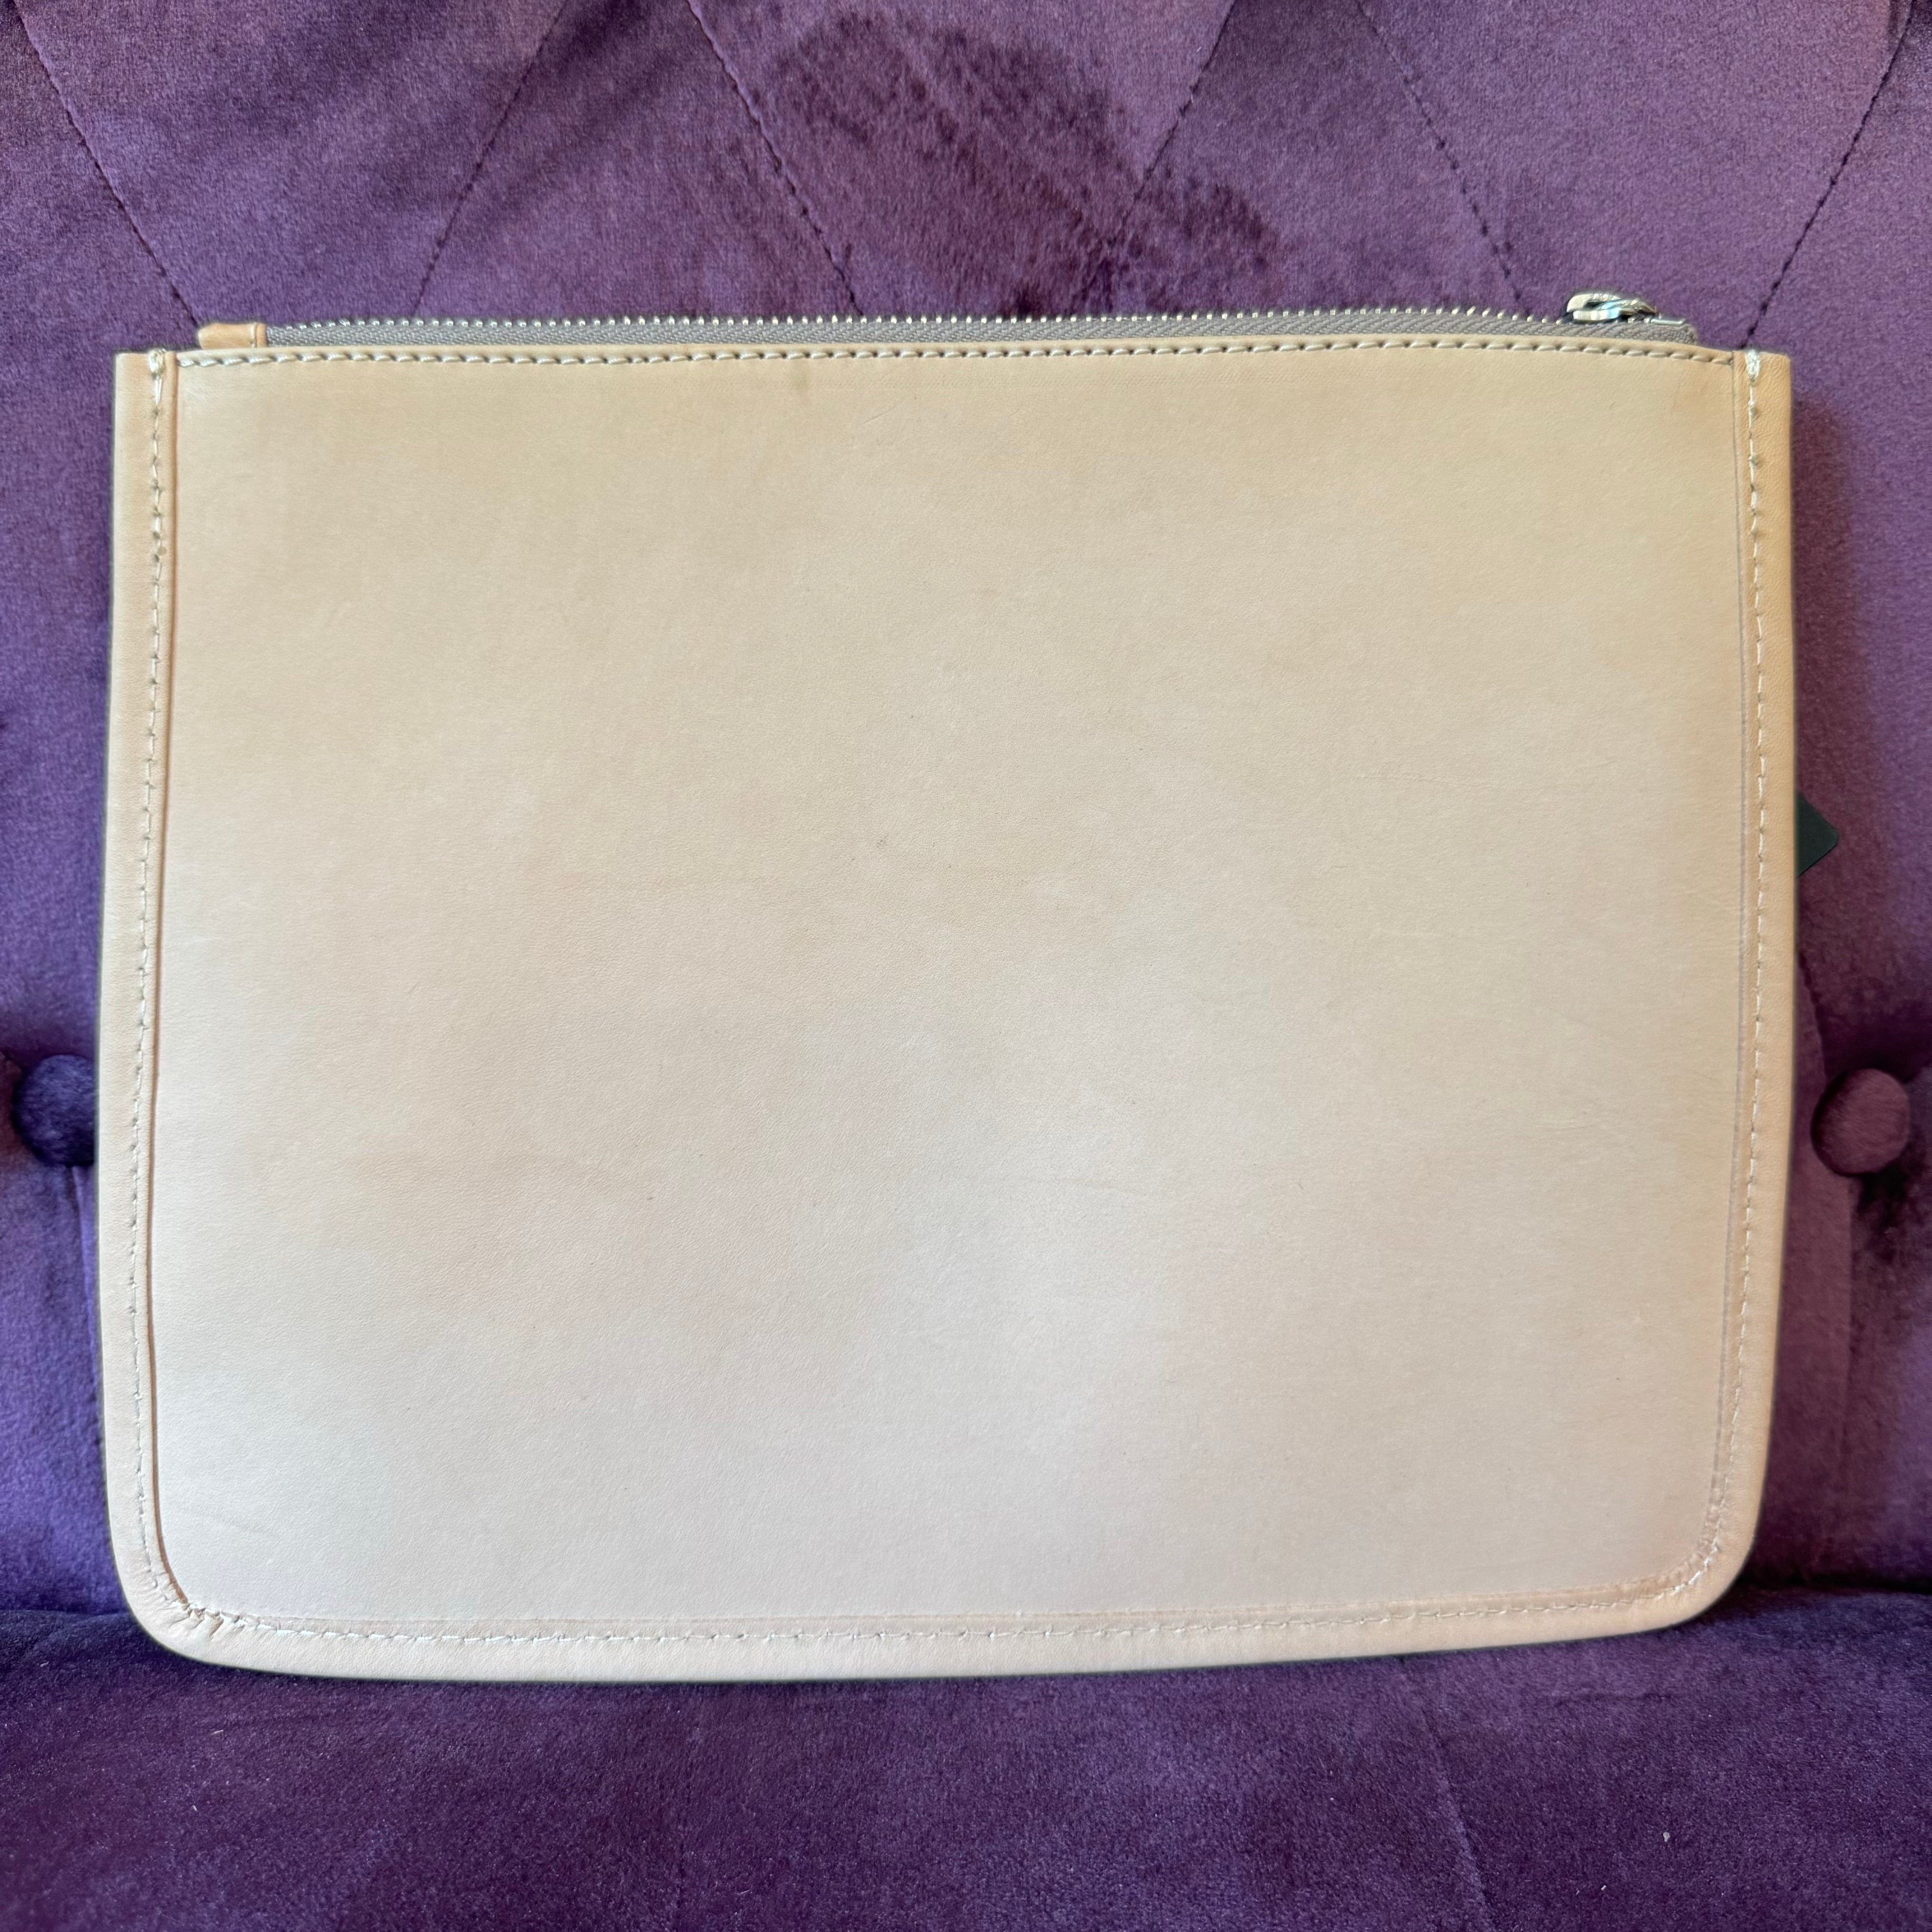 Blemished Consuela #2407 Diego Genuine Leather Anything Goes Zipper Pouch • FINAL SALE